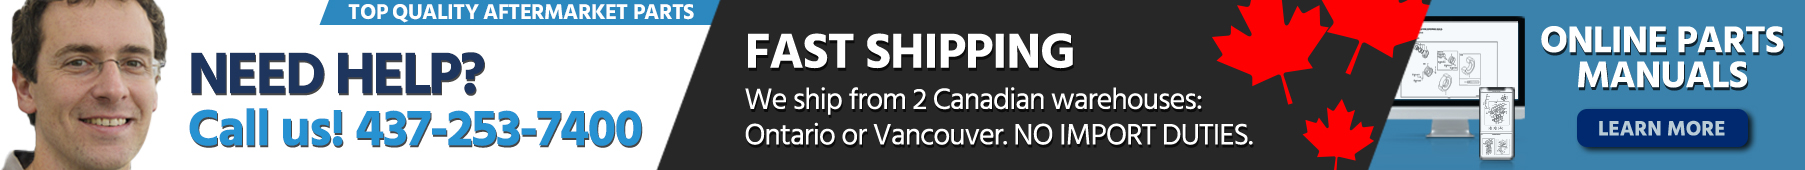 Need Help? Just call 437-253-7400. Fast Shipping from two Canadian Warehouses: Ontario or Vancouver. No import duties